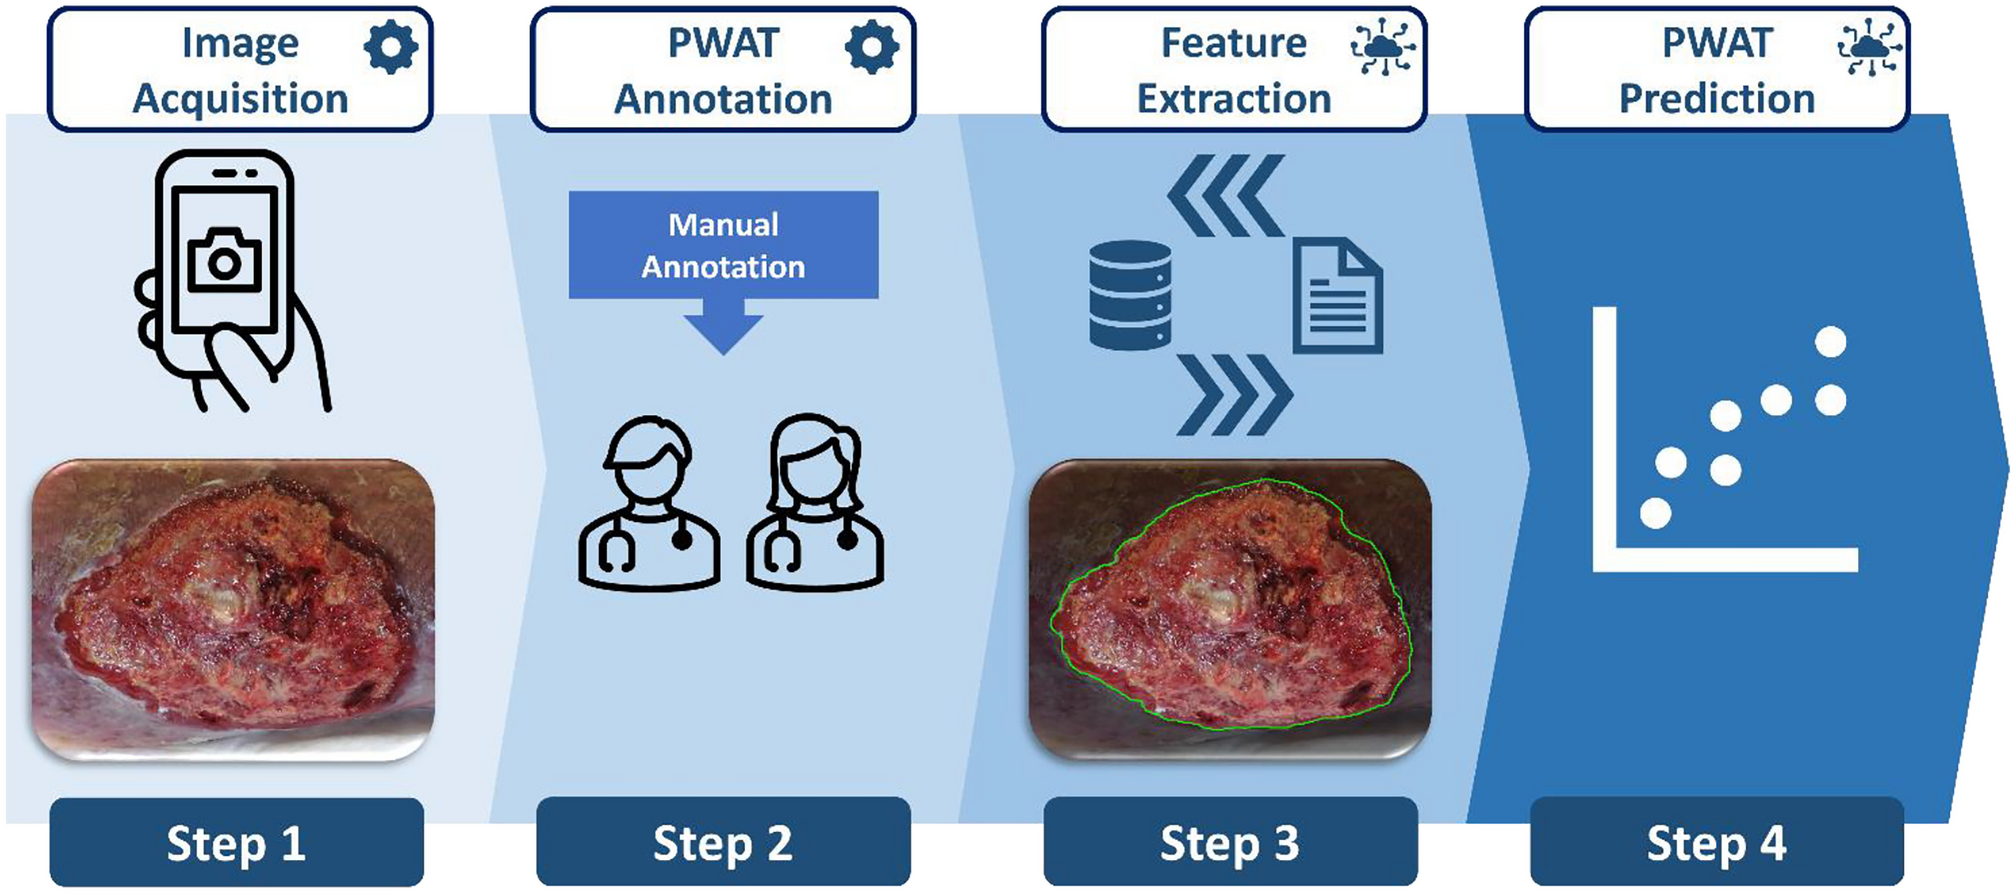 Automated Prediction of Photographic Wound Assessment Tool in Chronic Wound Images